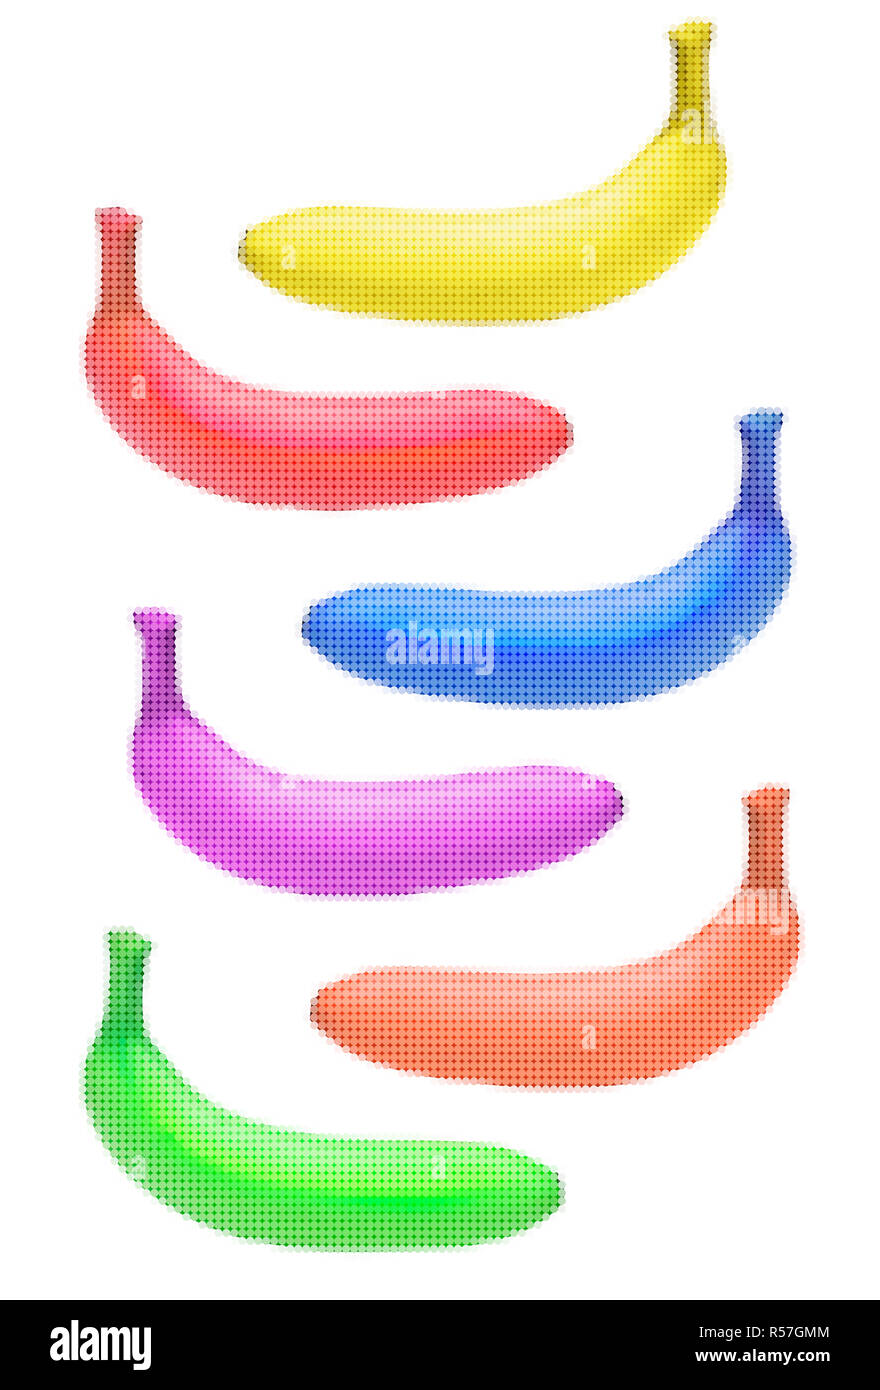 bananas colorful colors concept Stock Photo